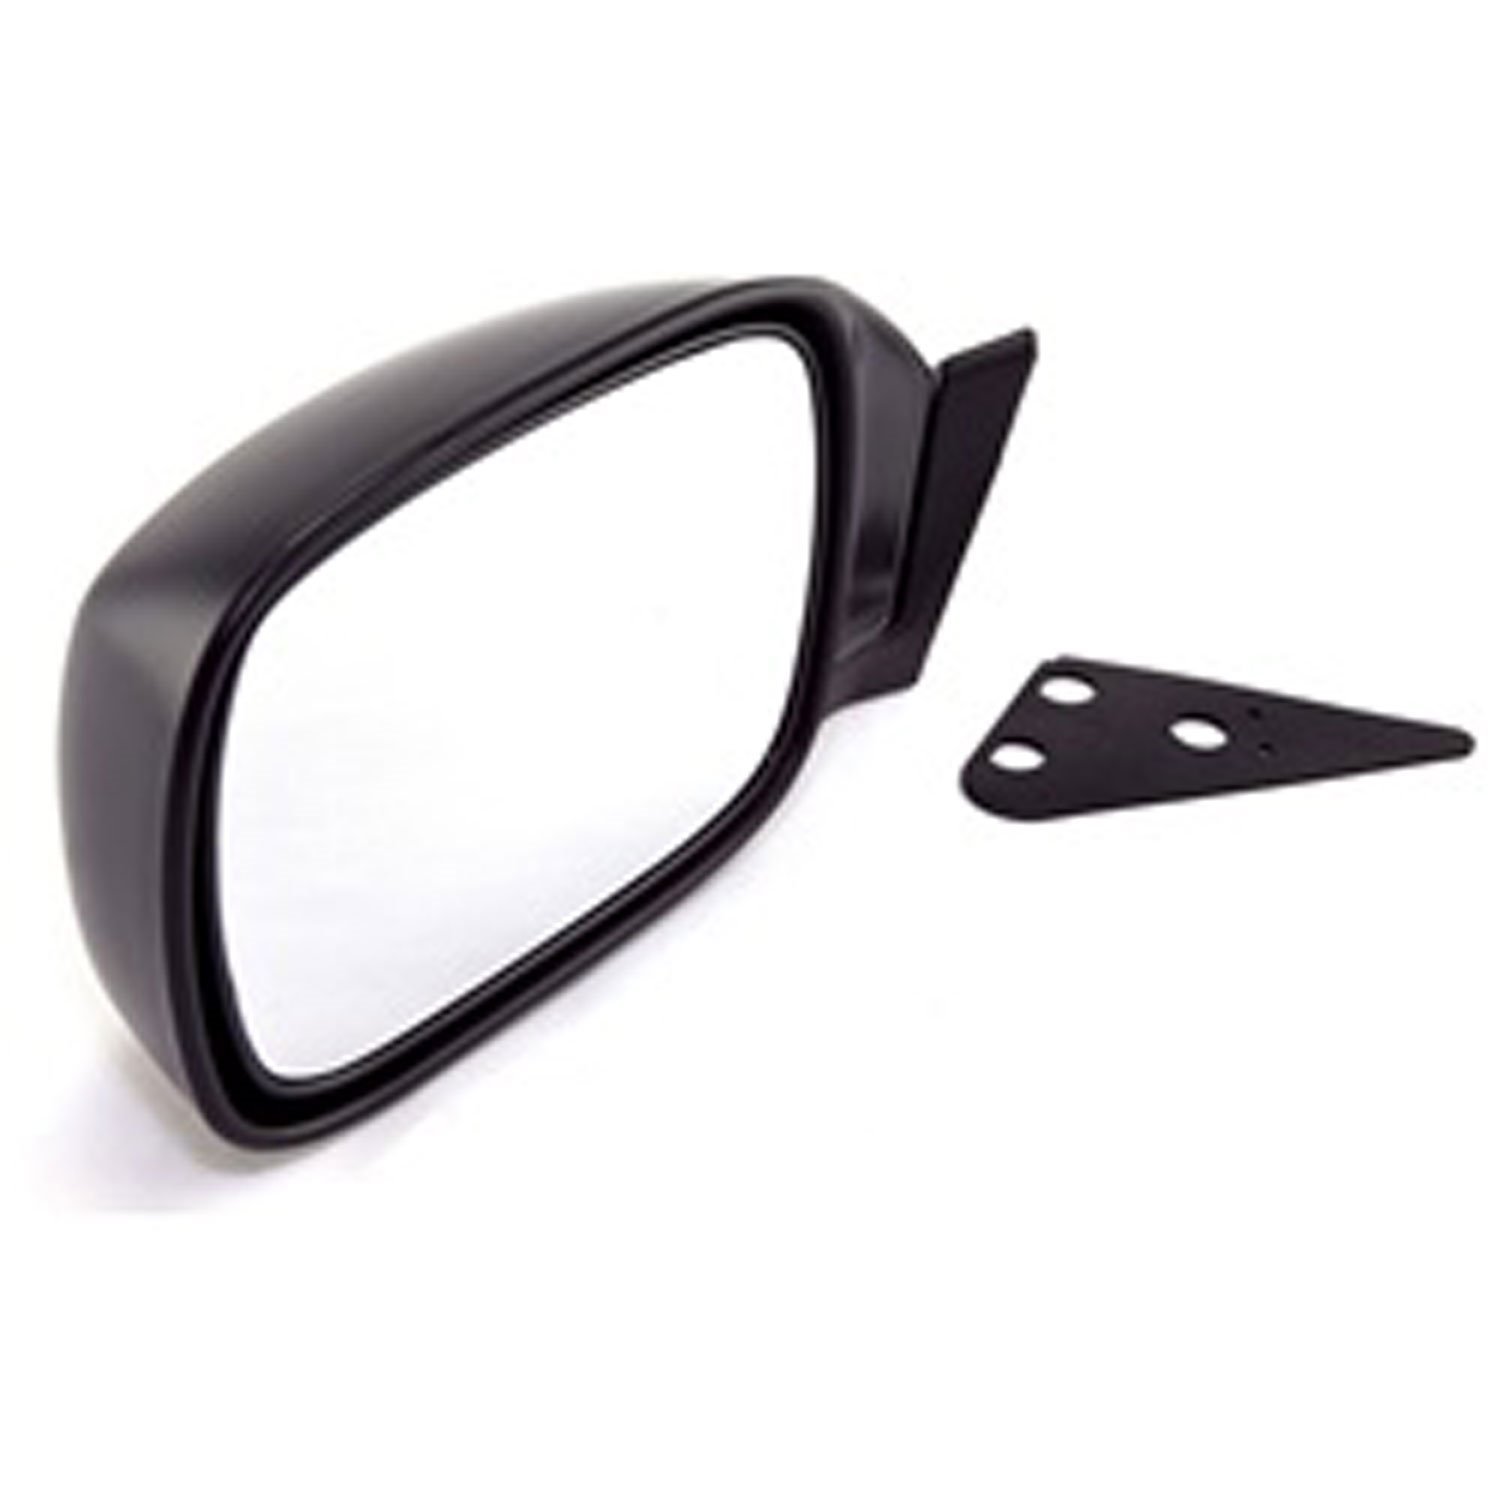 This black left folding door mirror from Omix-ADA fits 97-01 Jeep Cherokee XJ. Features manual remote control.